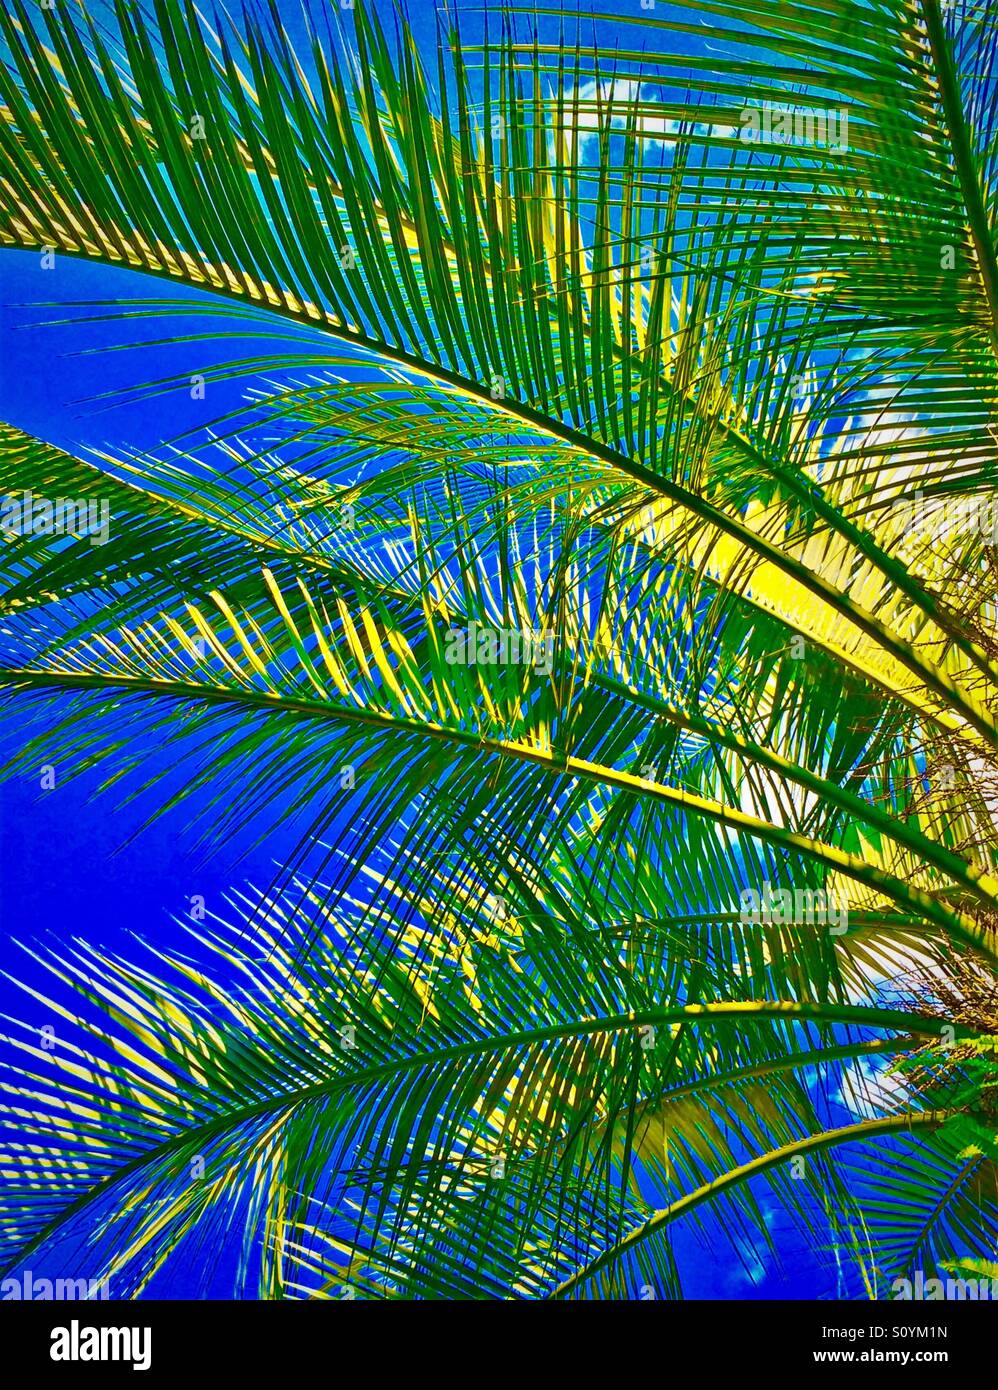 Green palm fronds against blue sky Stock Photo